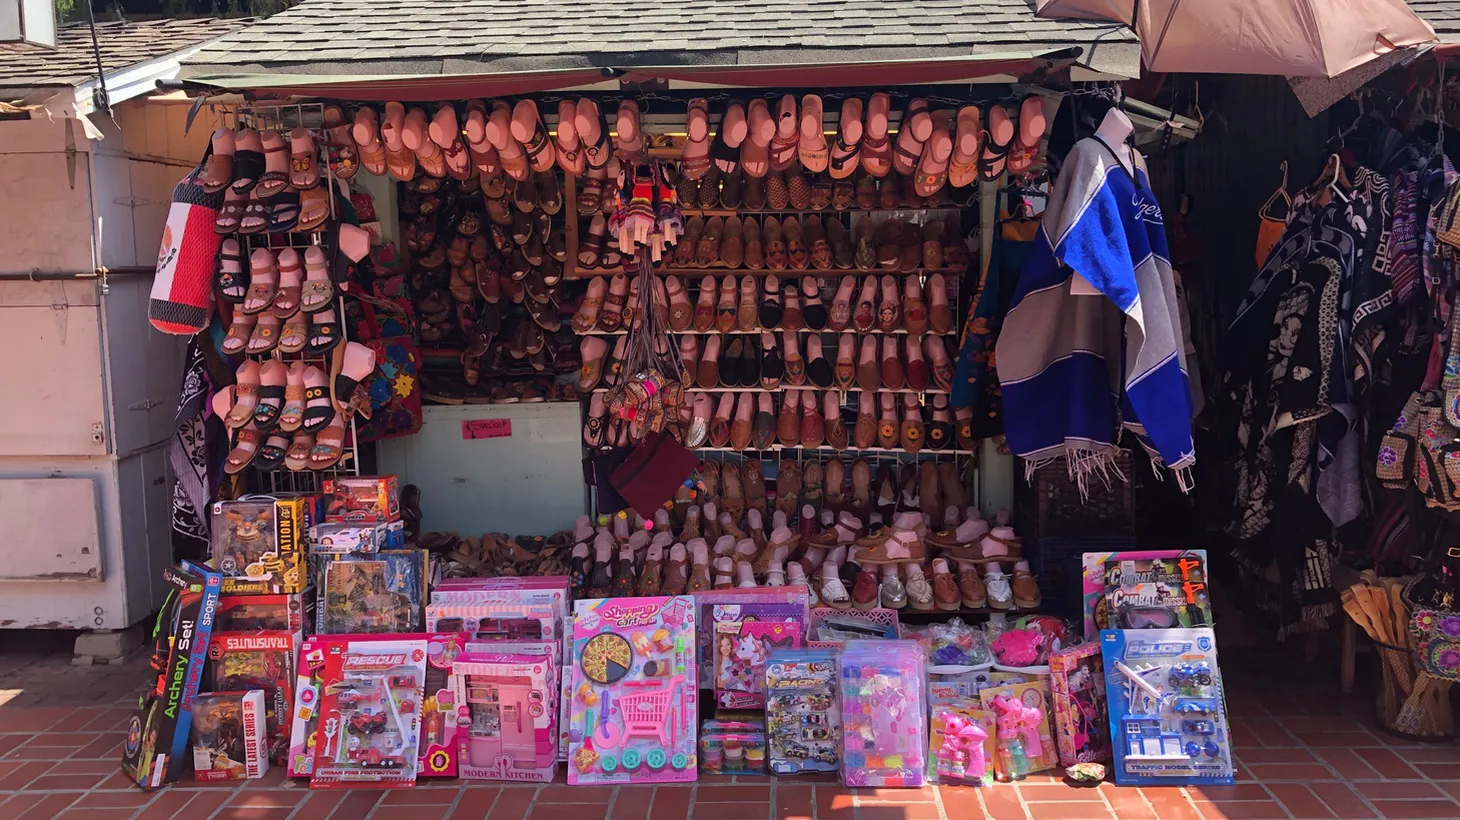 Business is slow at this Olvera Street puesto, which is selling huarches alongside cheap trinkets and toys. Another stall (left) has already closed for the day. “The crowds just aren’t coming back,” says Olvera Street merchant Valerie Hanley.